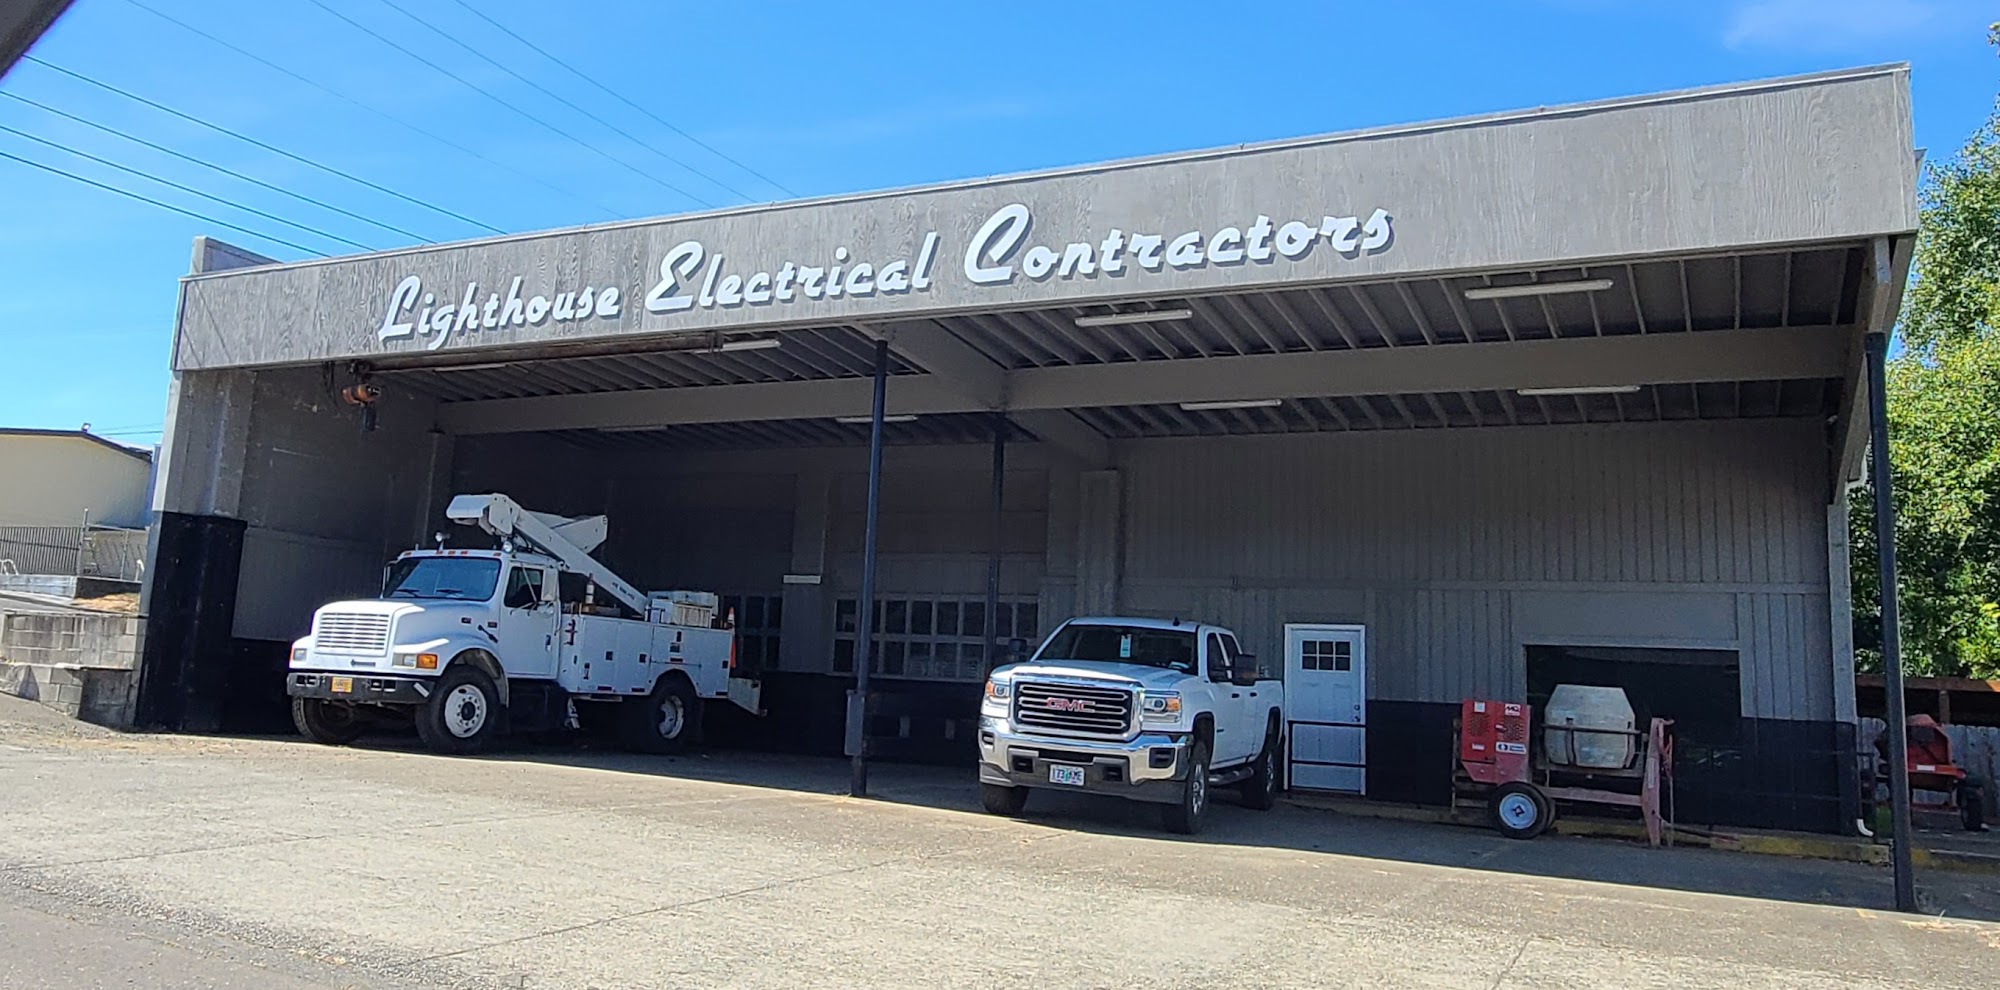 Lighthouse Electrical Contractors 1785 Winchester Ave, Reedsport Oregon 97467